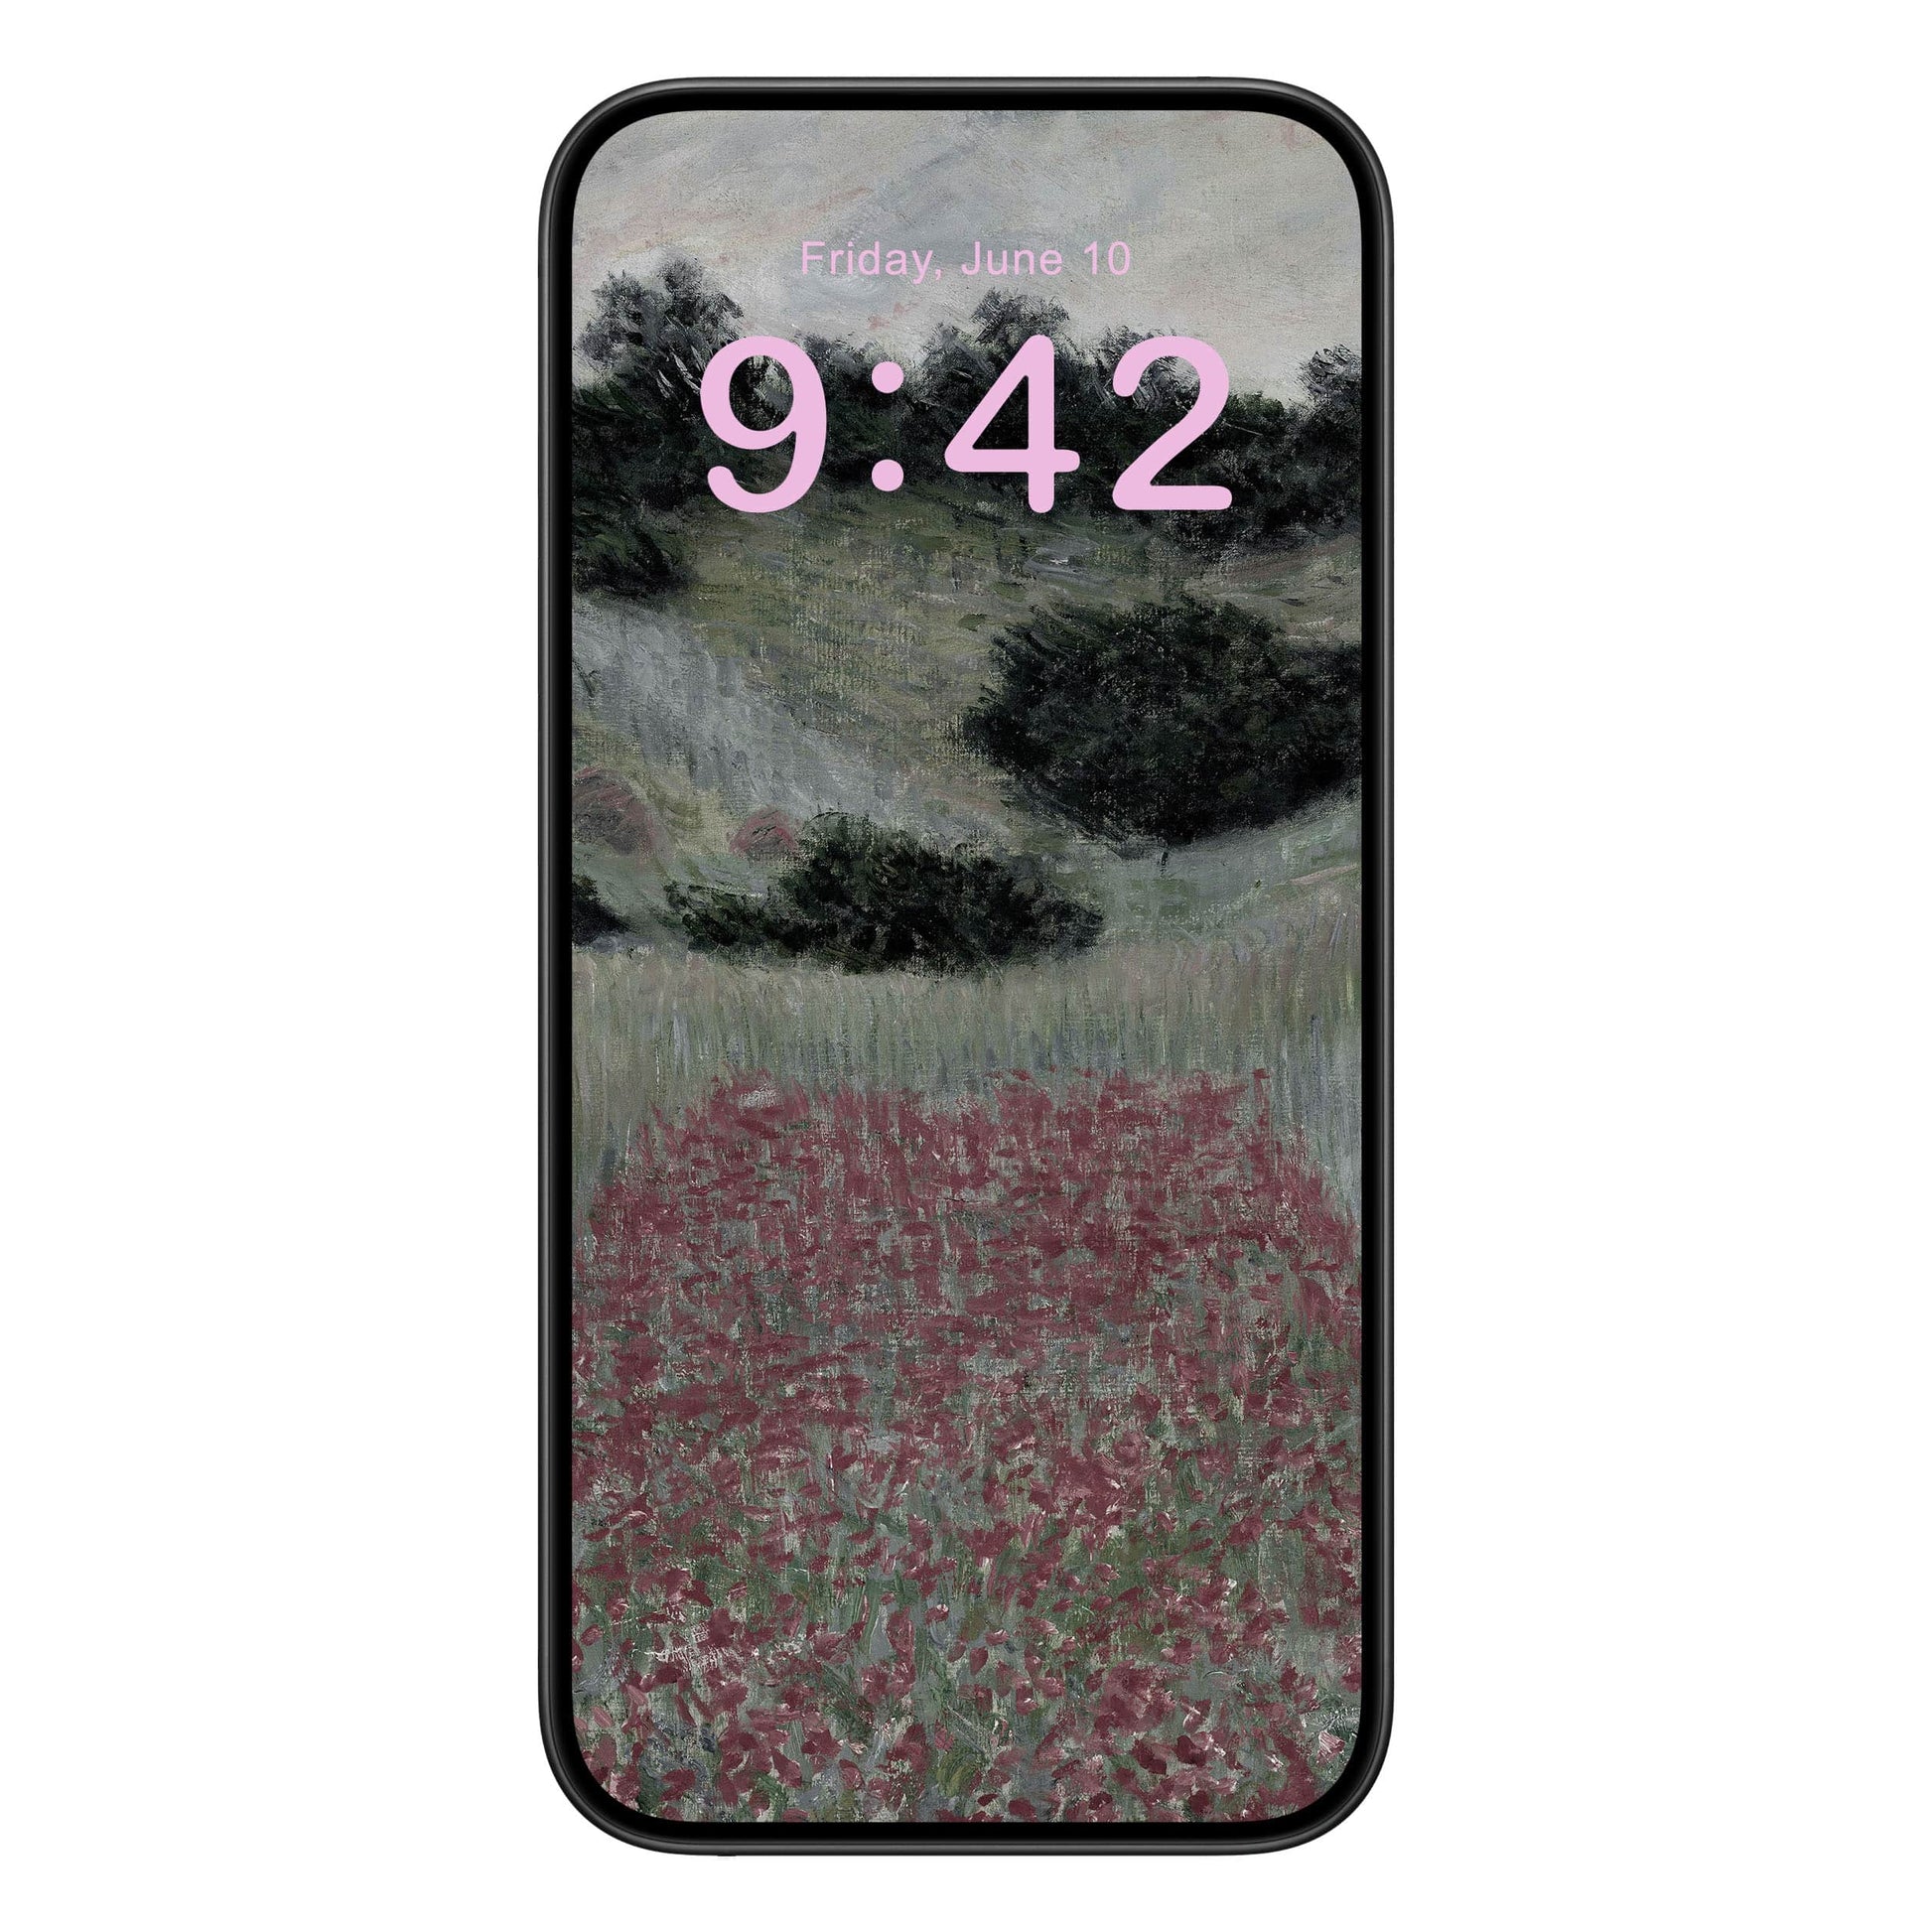 Muted Floral Landscape Phone Wallpaper Pink Text